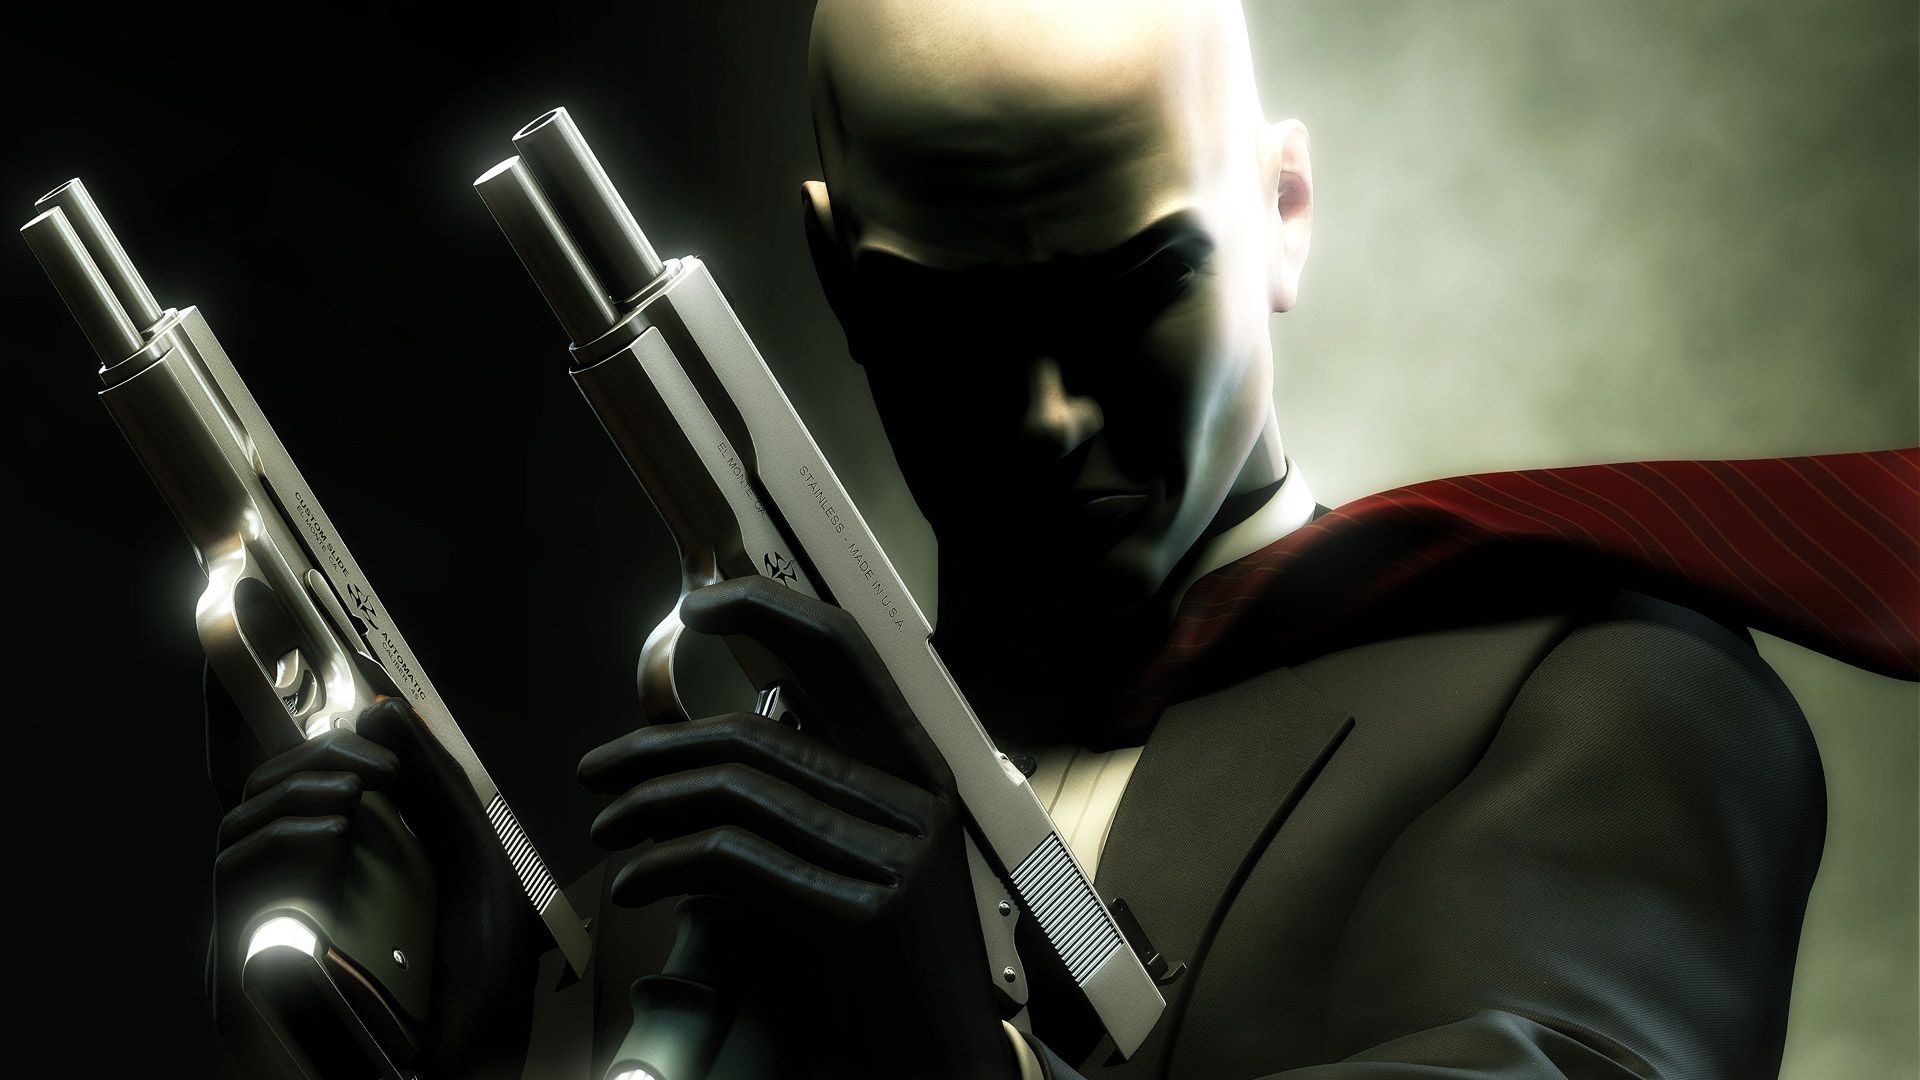 Hitman Contracts stealth, Contracted kills, Intense missions, Professional assassin, 1920x1080 Full HD Desktop